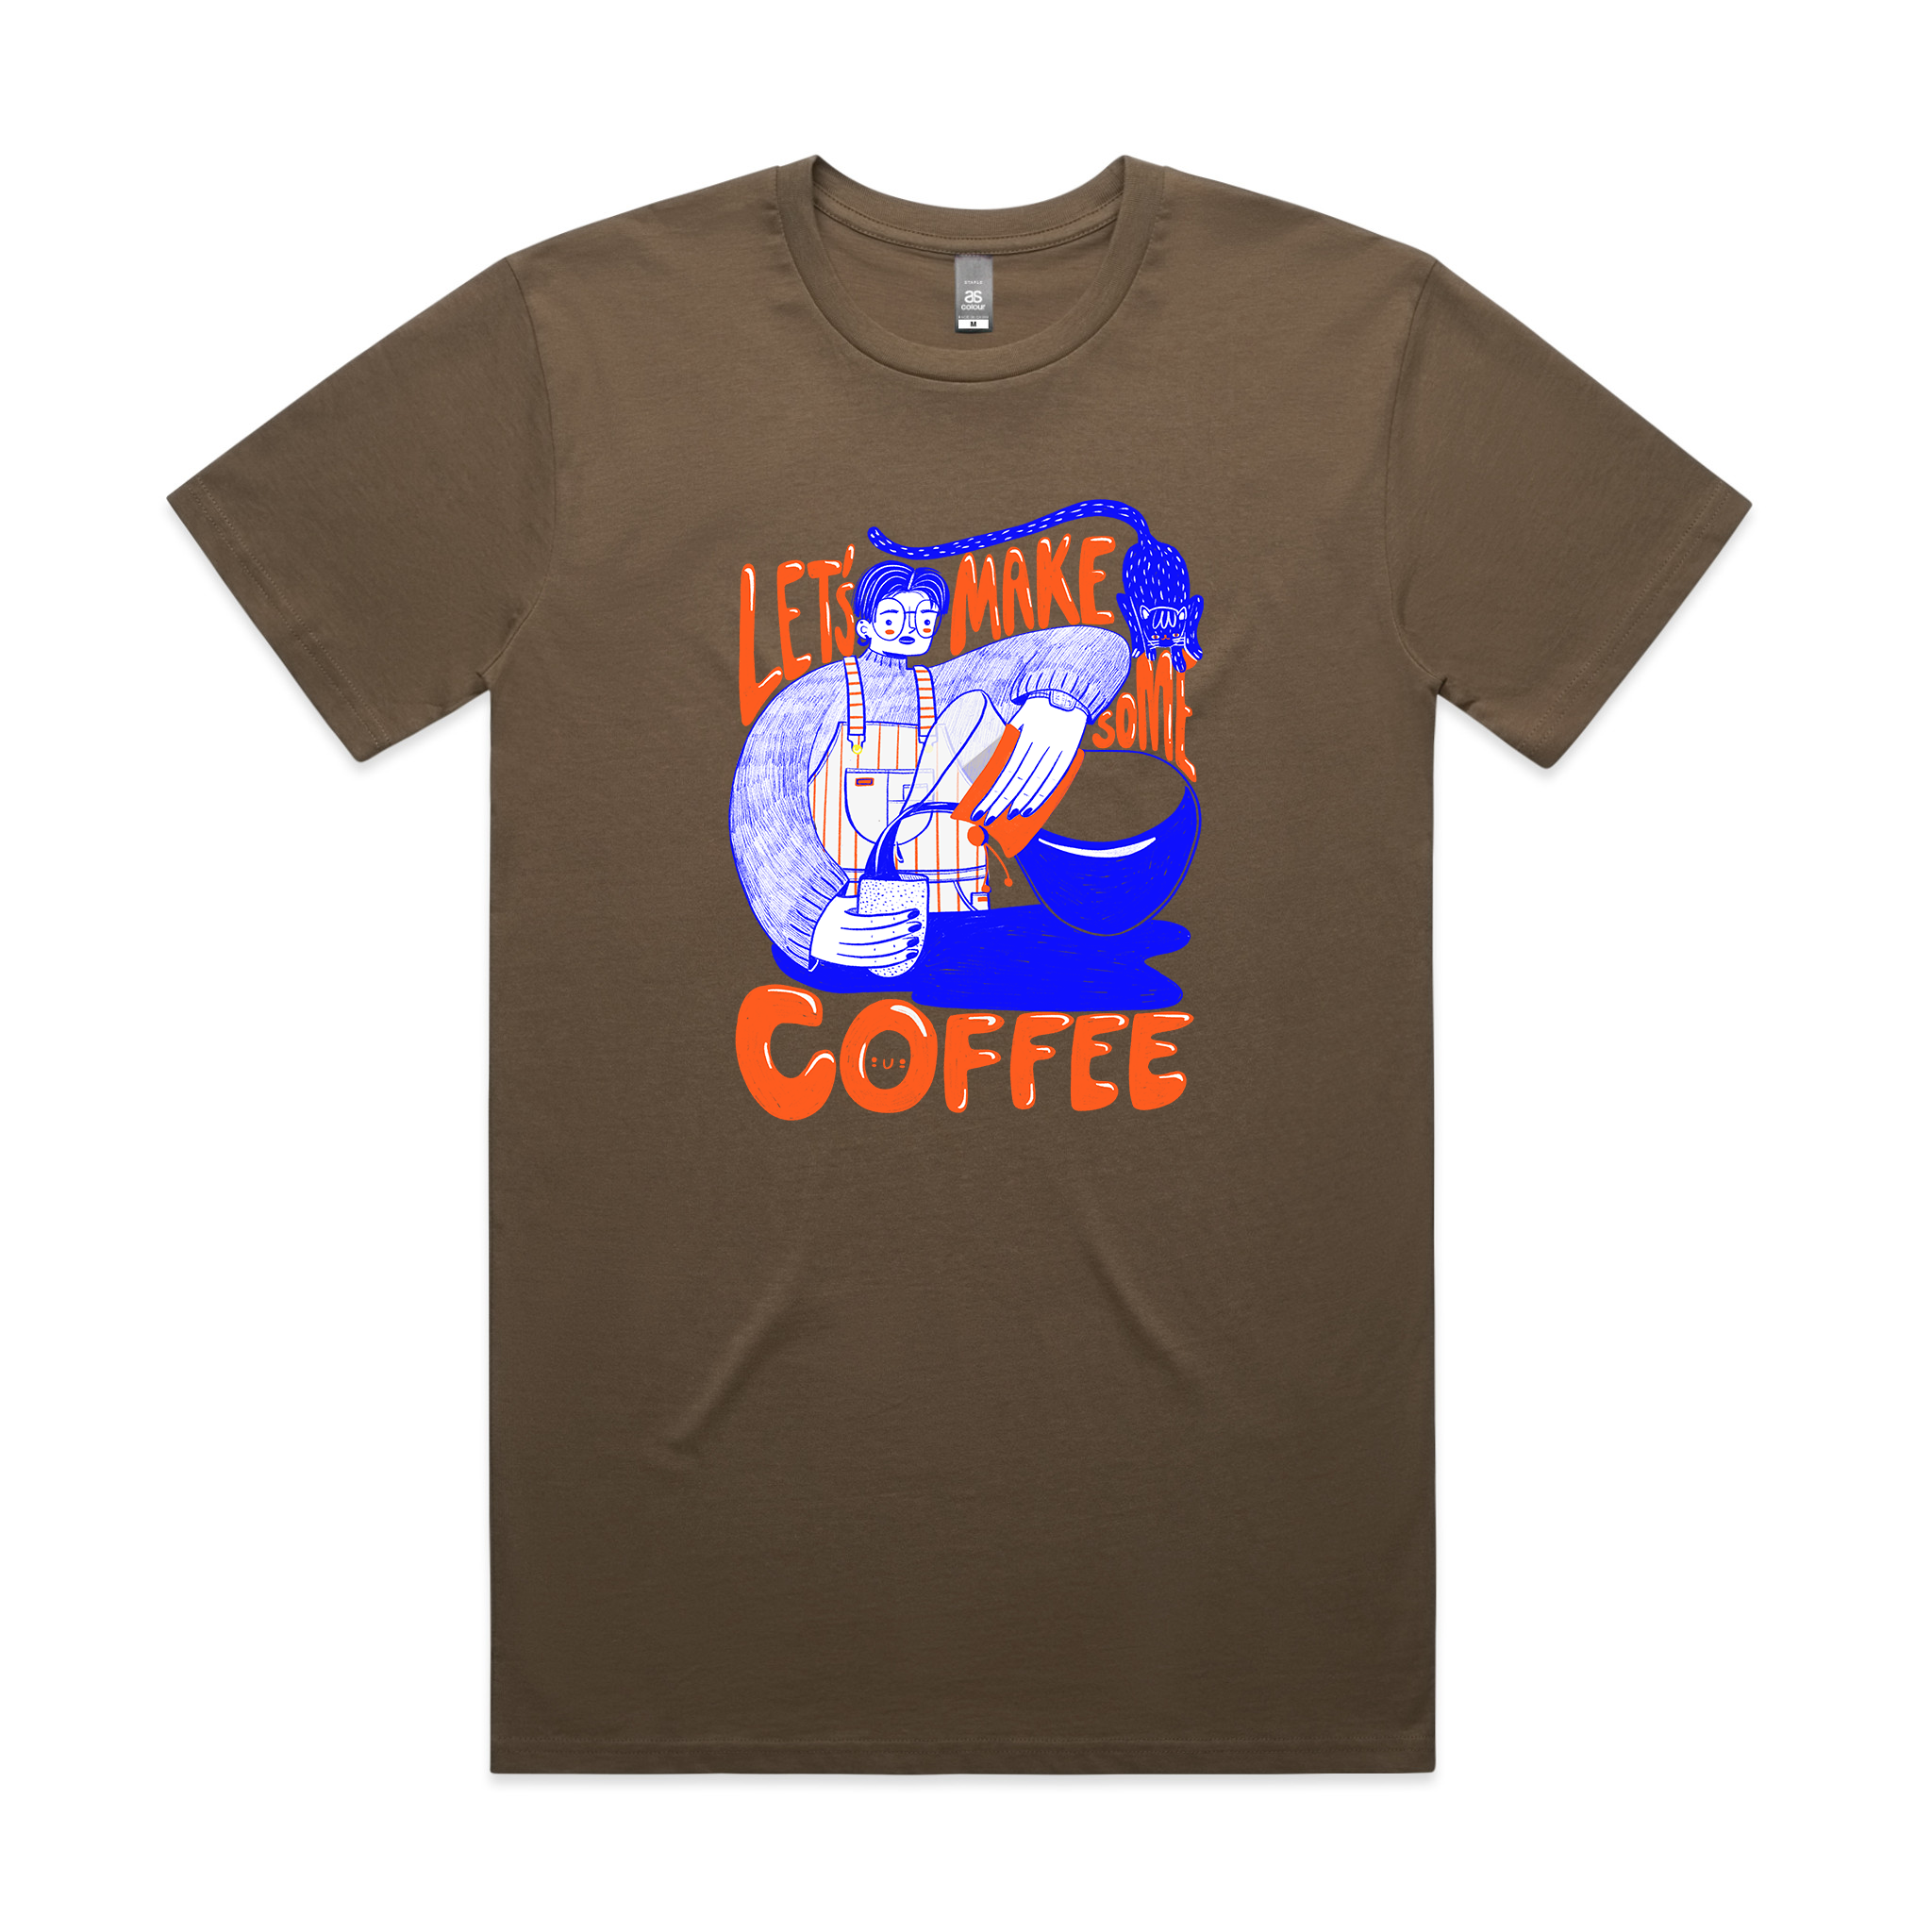 Let's Make Some Coffee Tee